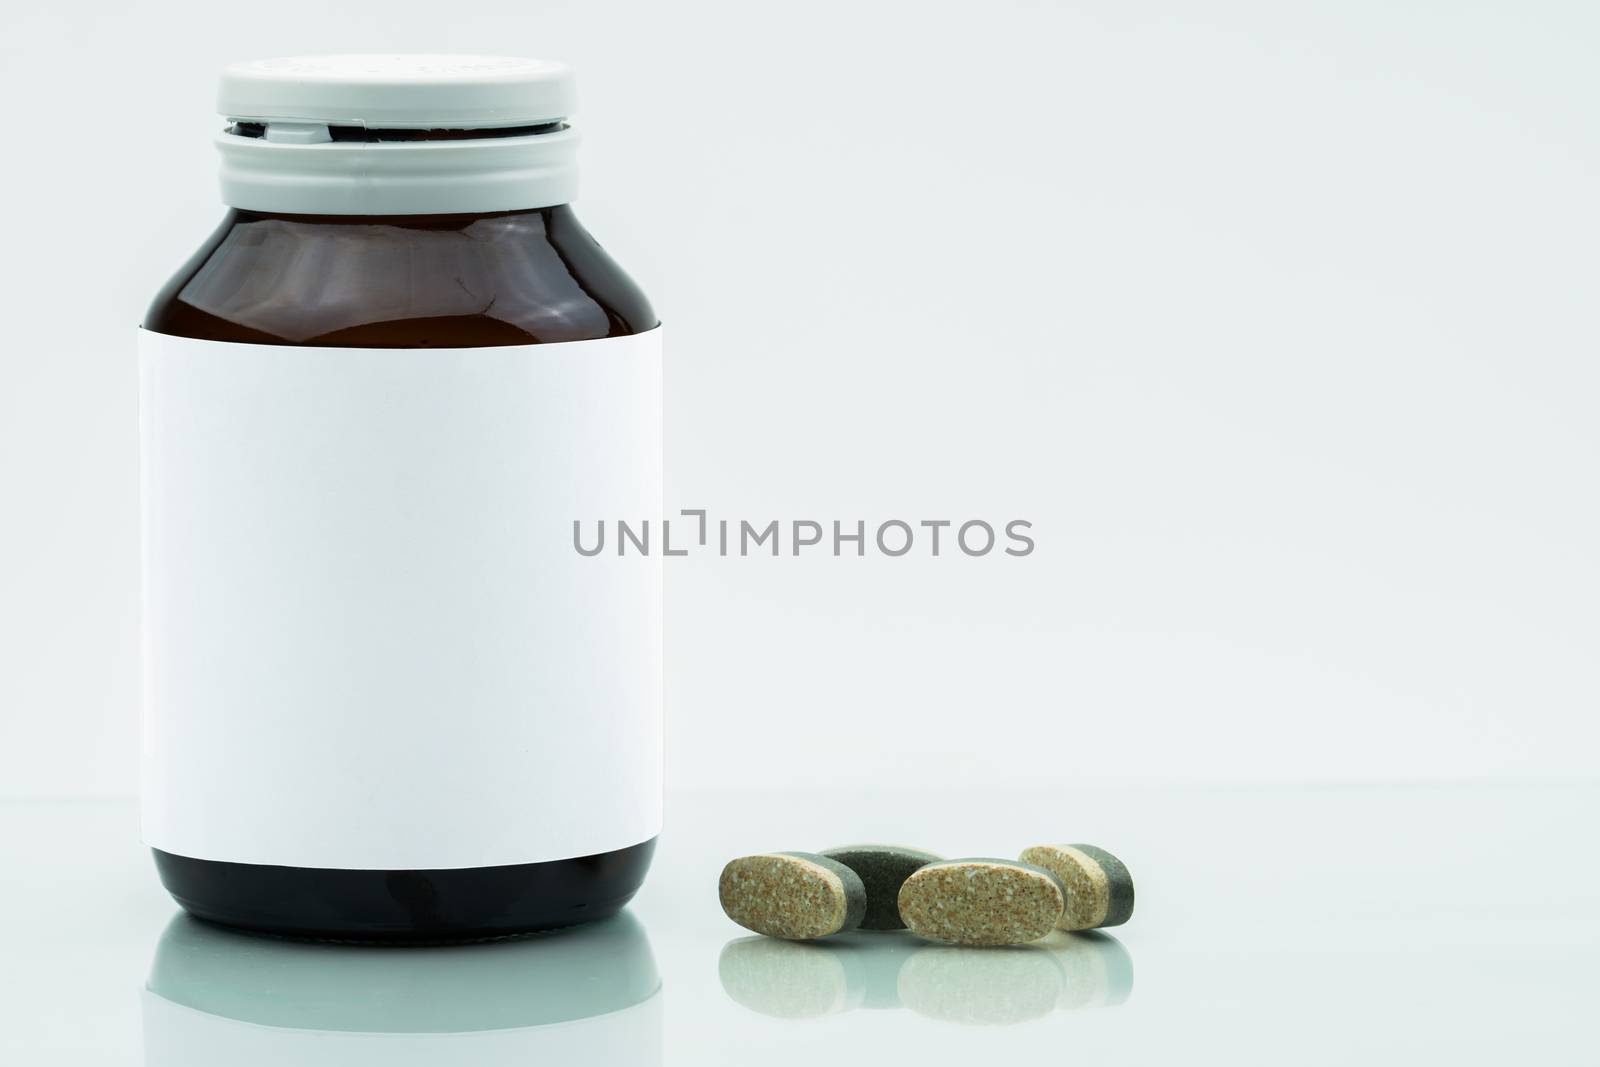 Vitamins, supplements and minerals dual layer tablets pills and medicine amber glass bottle with blank label isolated on white background with copy space. Use for vitamins and supplements advertising.